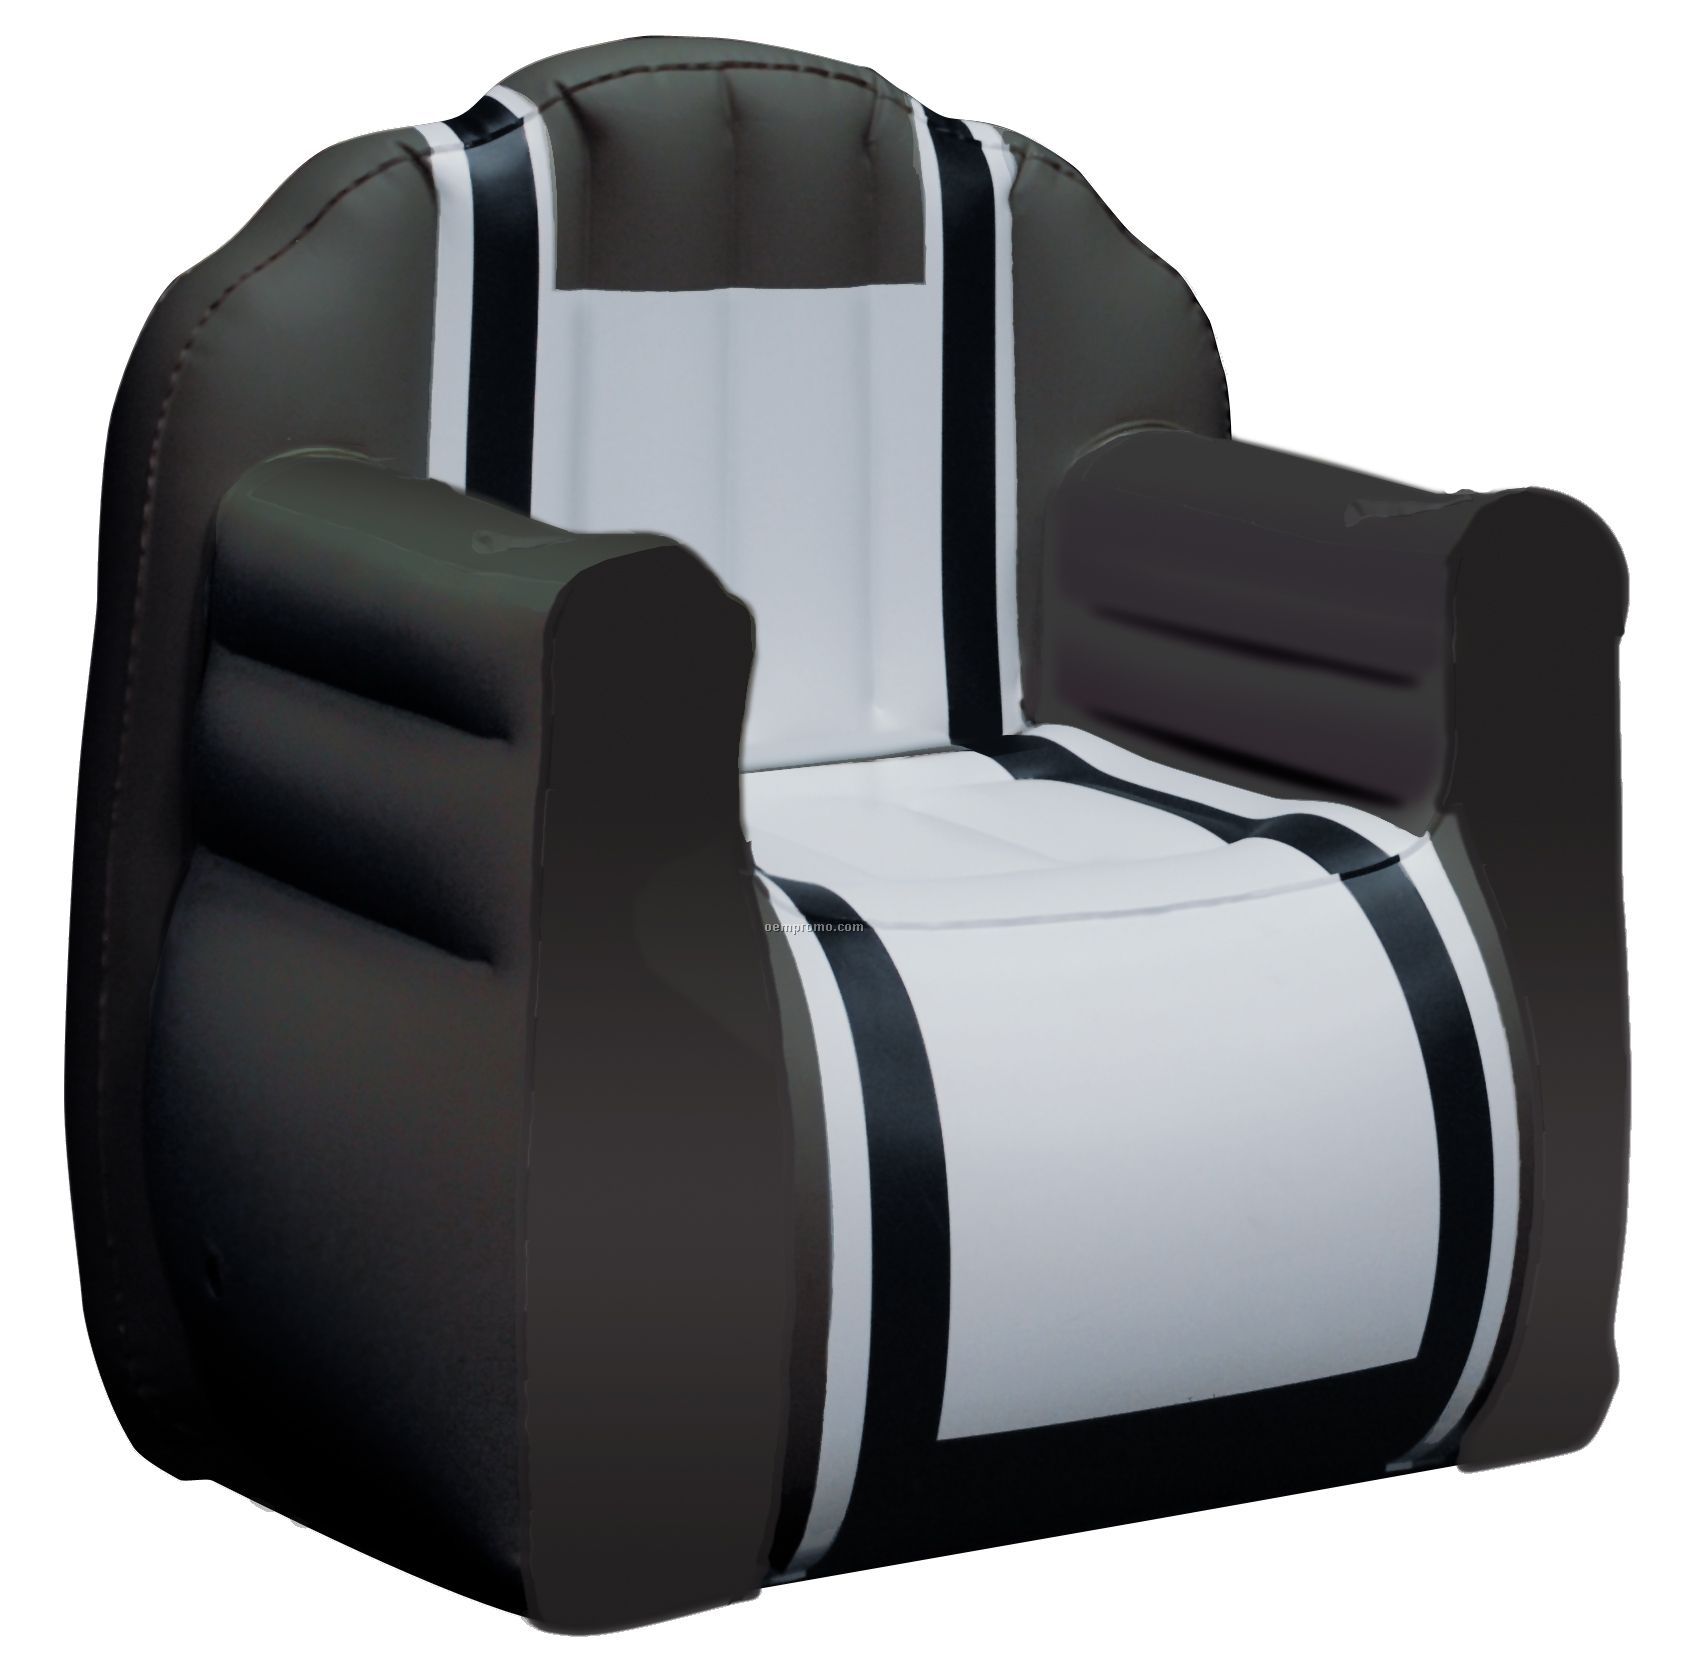 Inflate-a-seat "Chair": Black/White/Black